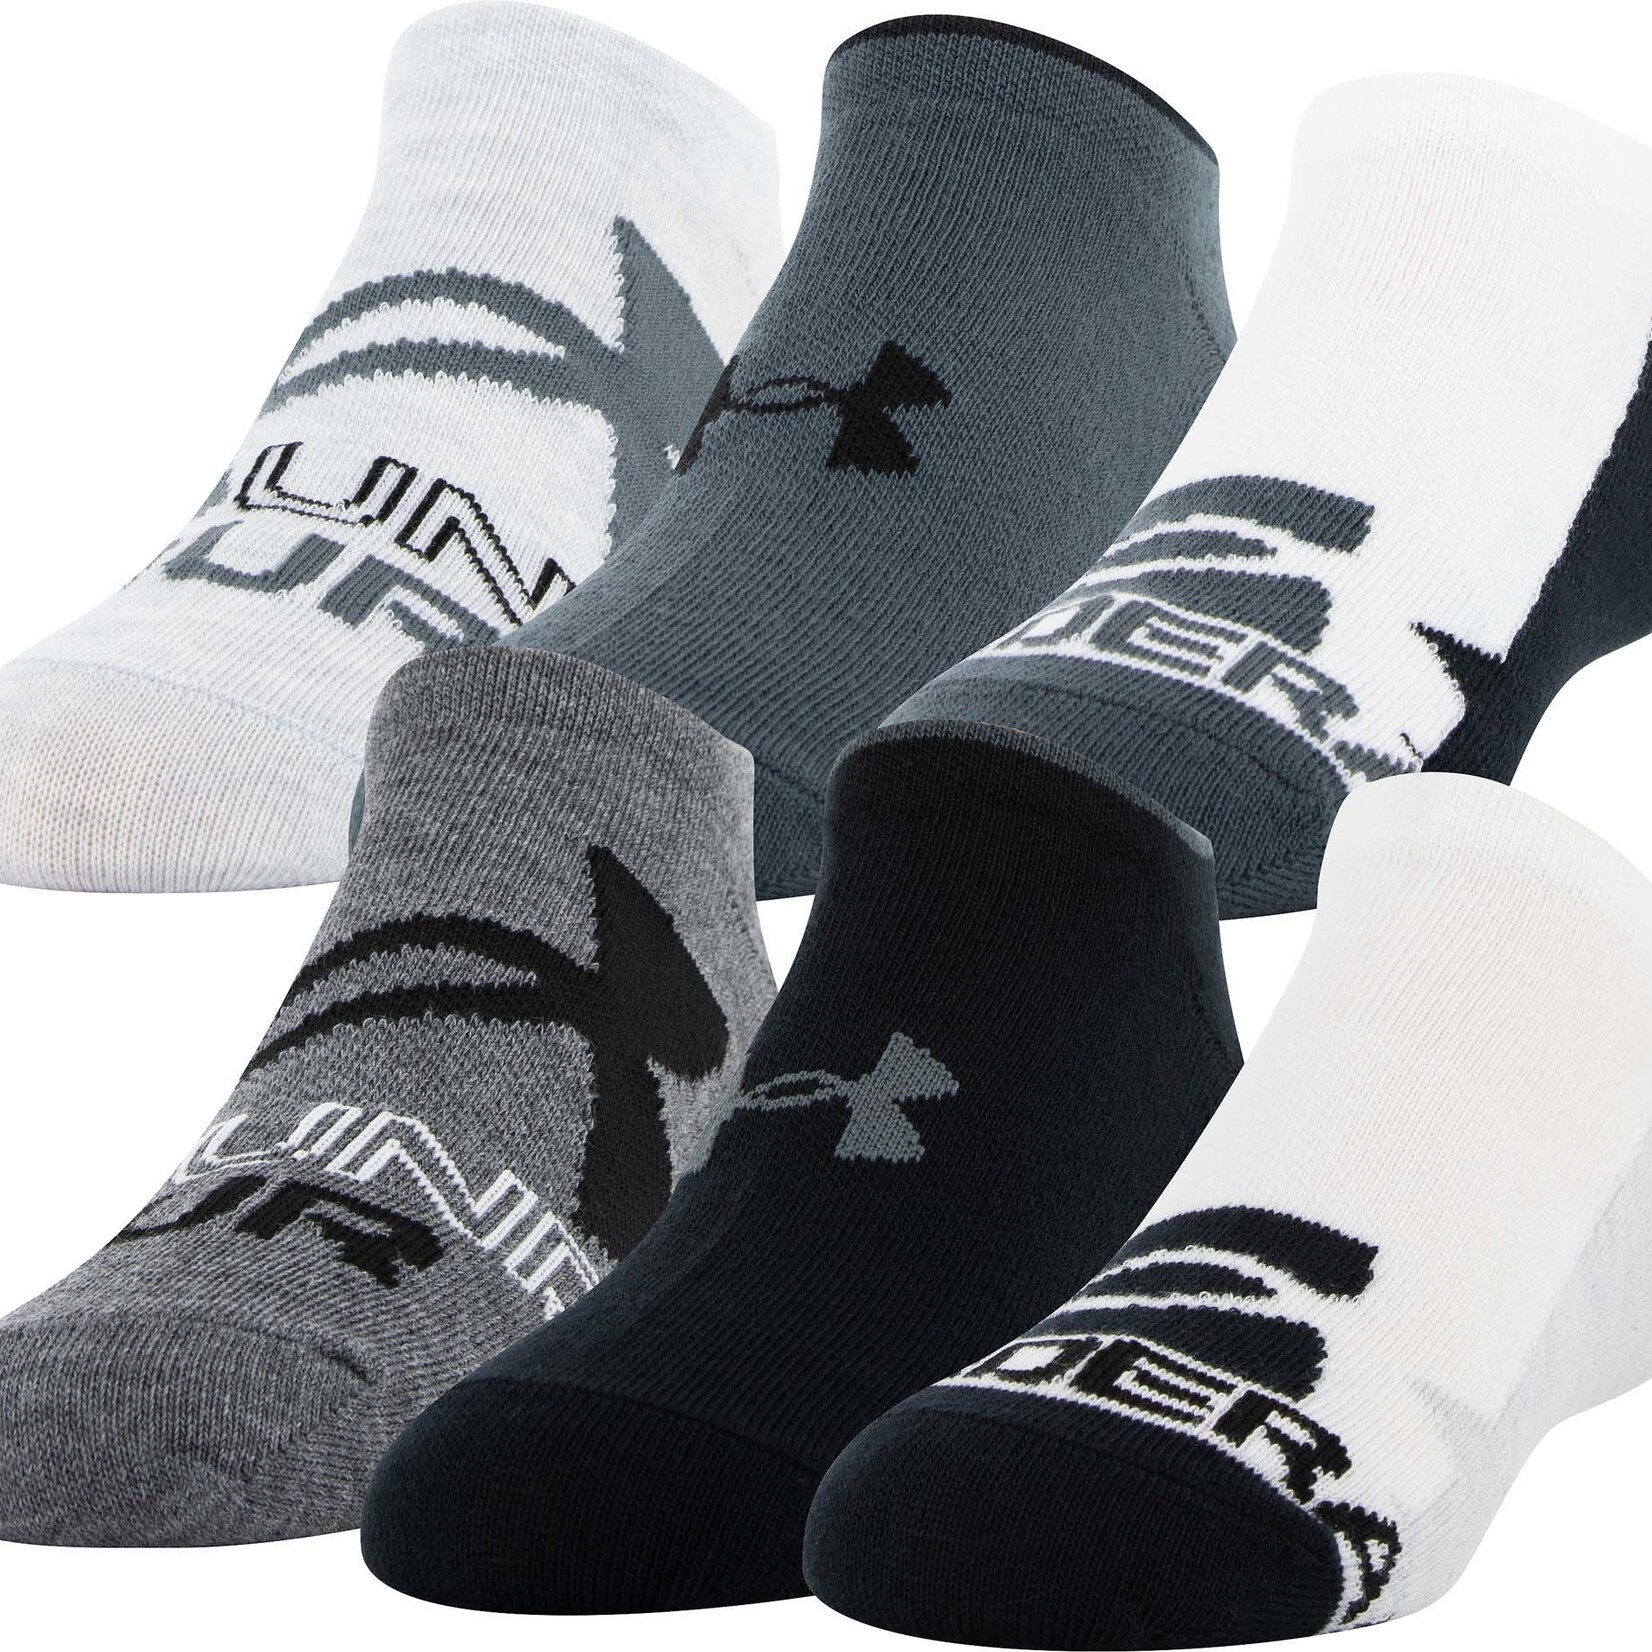 Under Armour Under Armour Socks, Essential Lite, No Show, 6-Pack, Youth